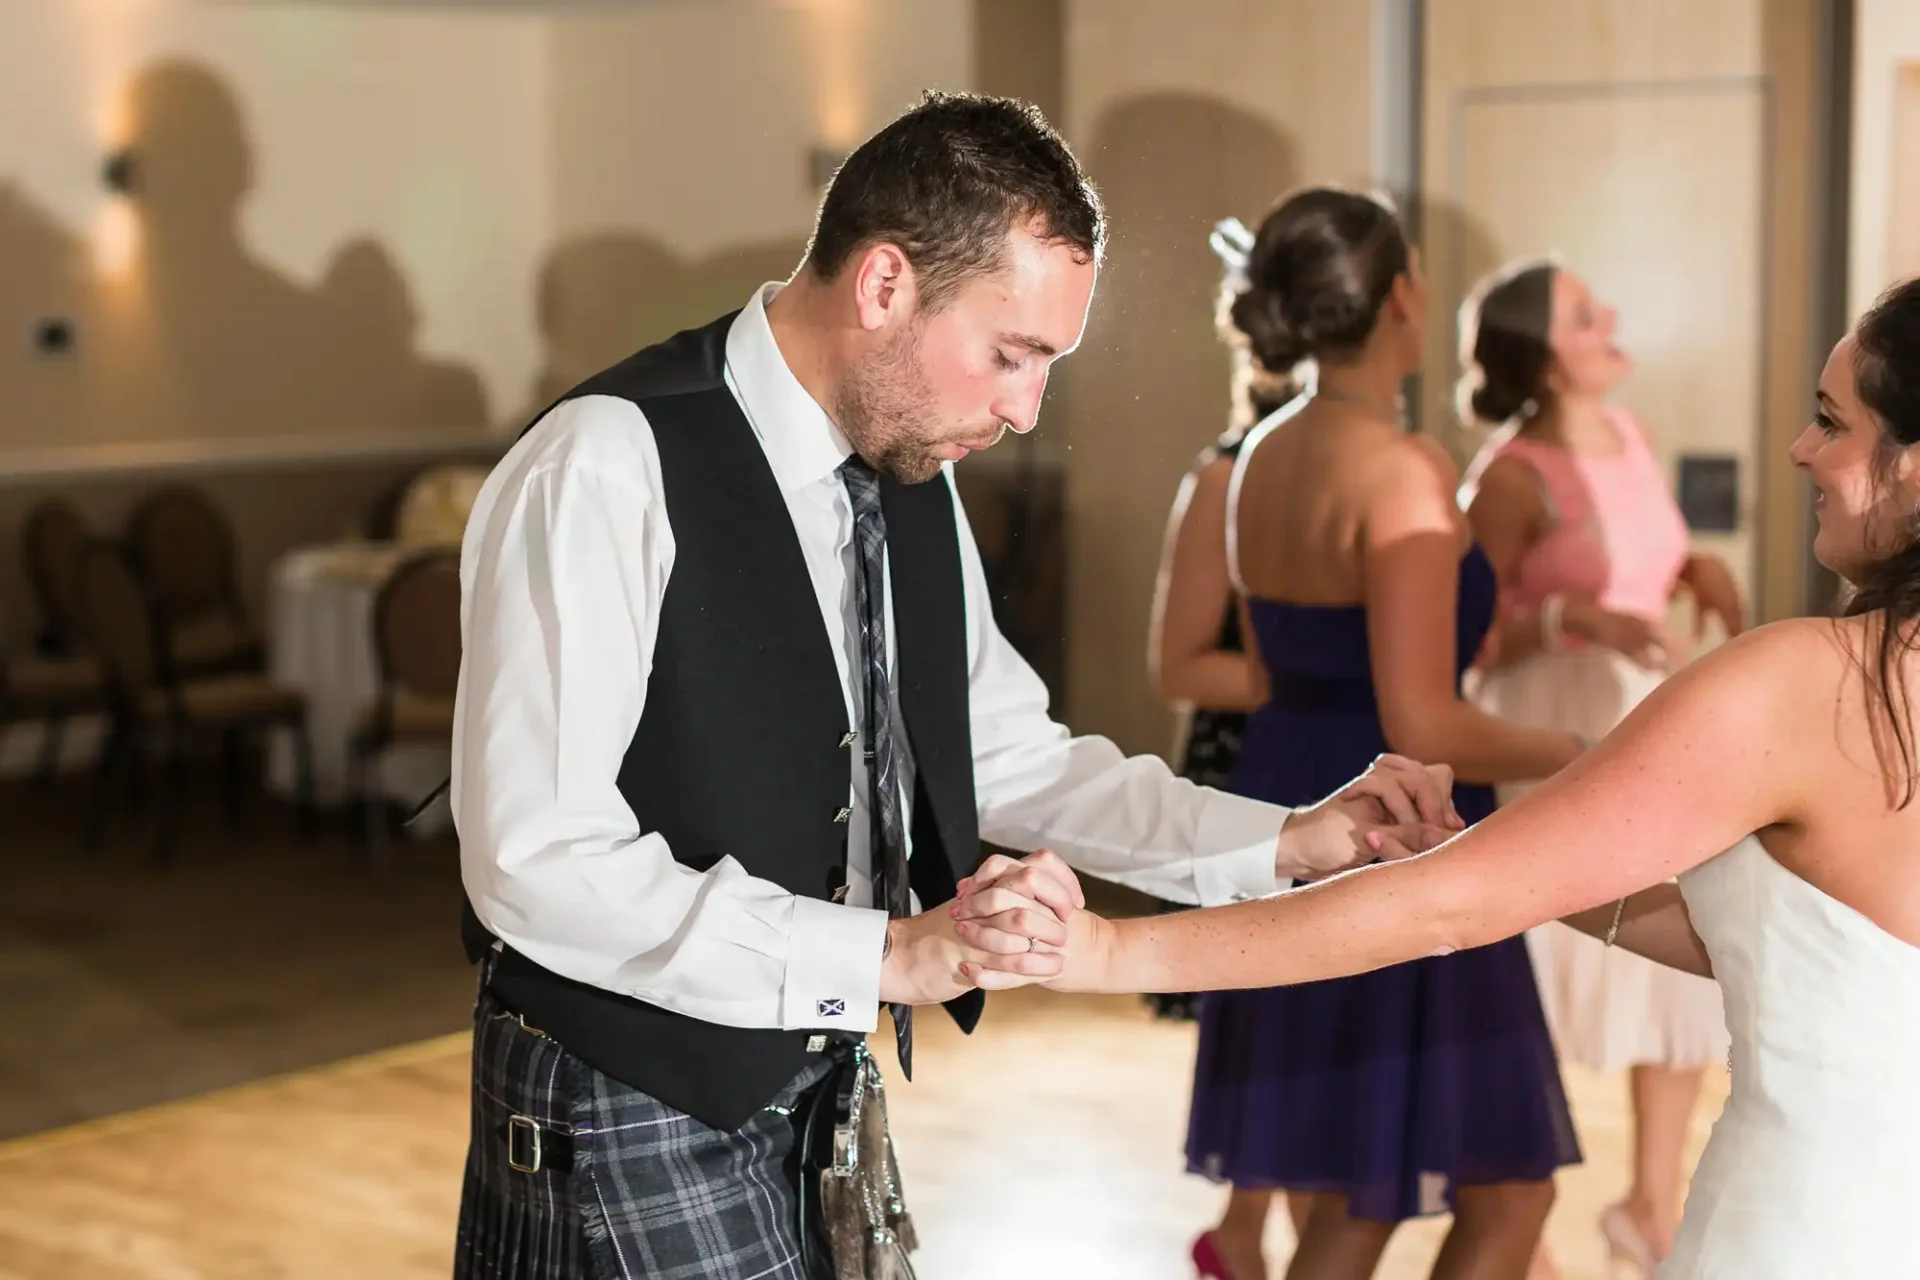 A man in a kilt and vest holds a woman's hand as they dance at a wedding reception, with other guests visible in the background.